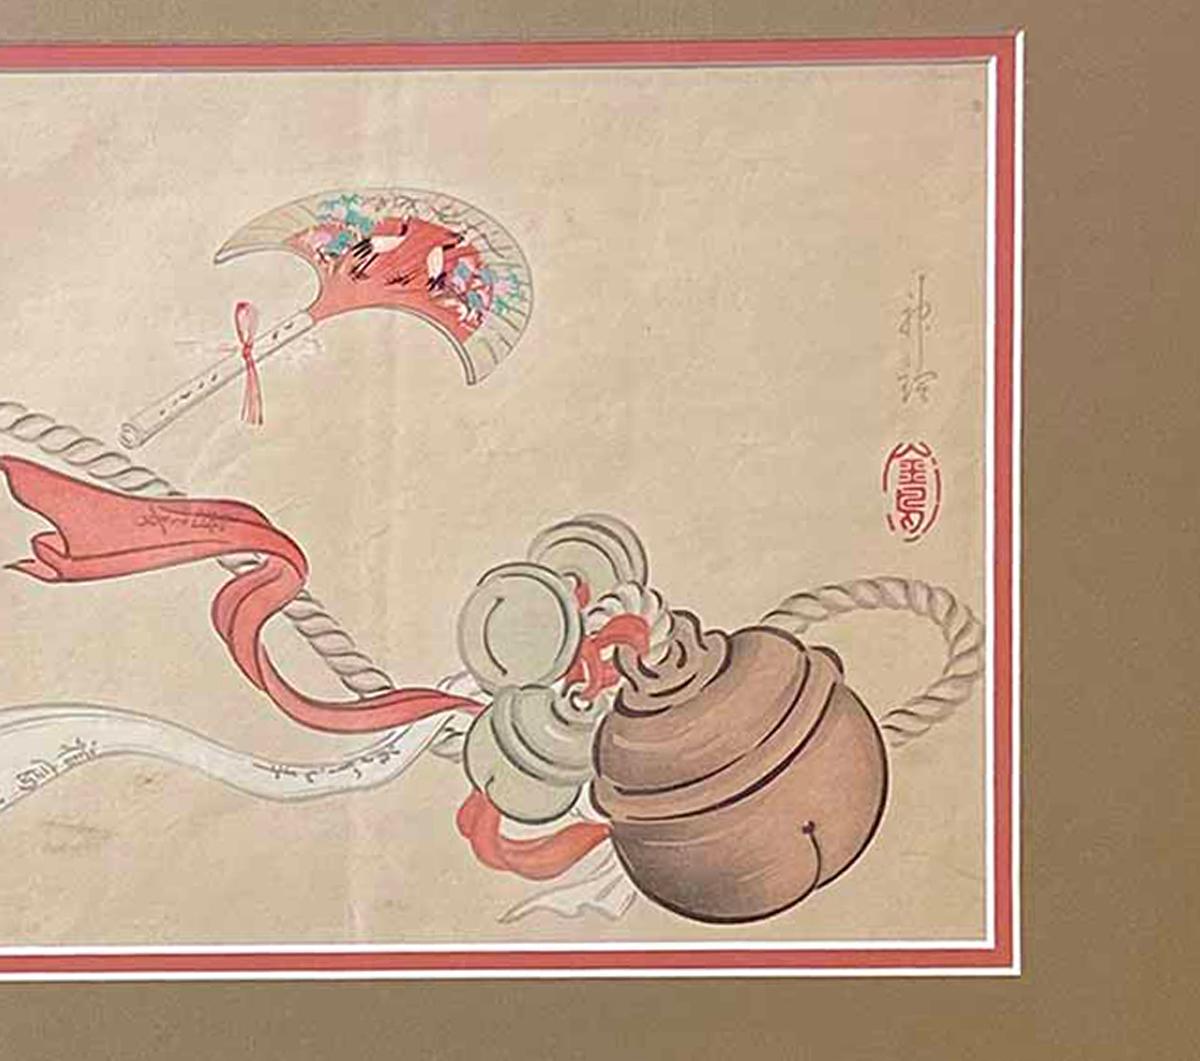 19th Century Japanese Woodblock Print Depicting a Ceremonial Tassel and Fan In Good Condition For Sale In Yonkers, NY